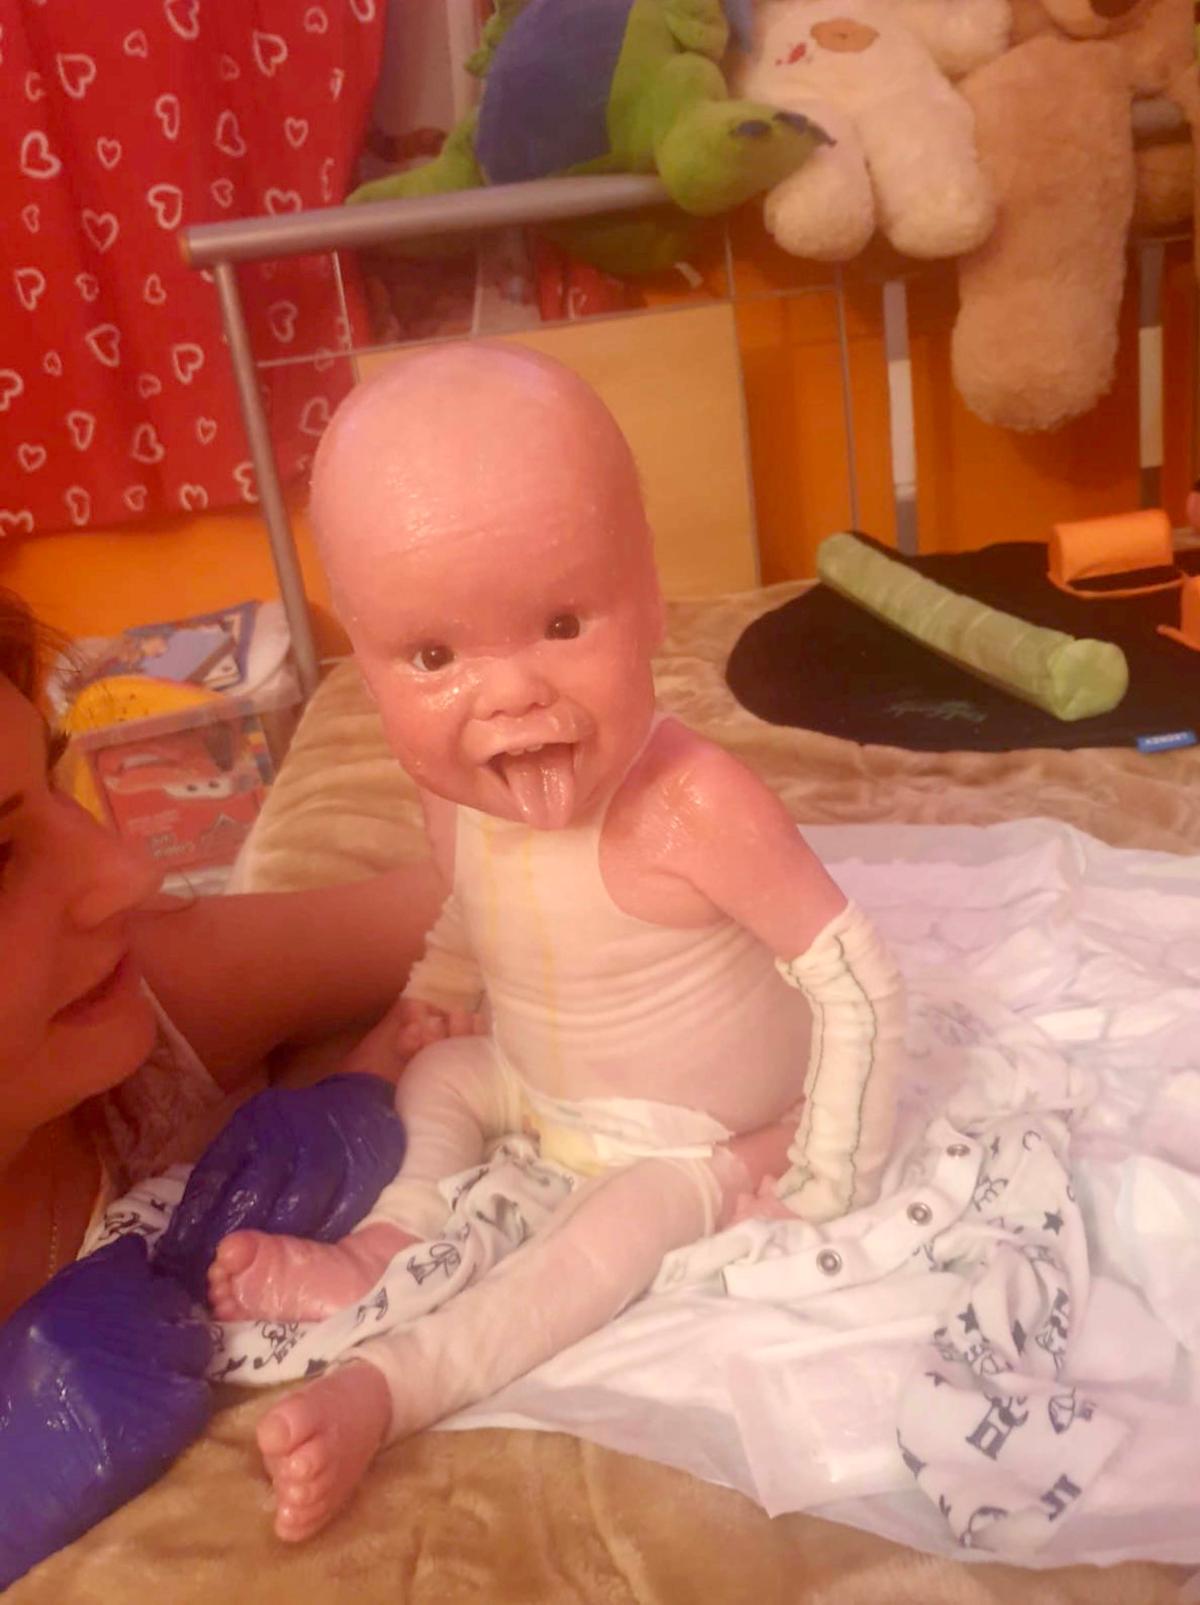 Two-year-old Michal Winter has rare skin condition that makes him look like a doll. (Caters News)